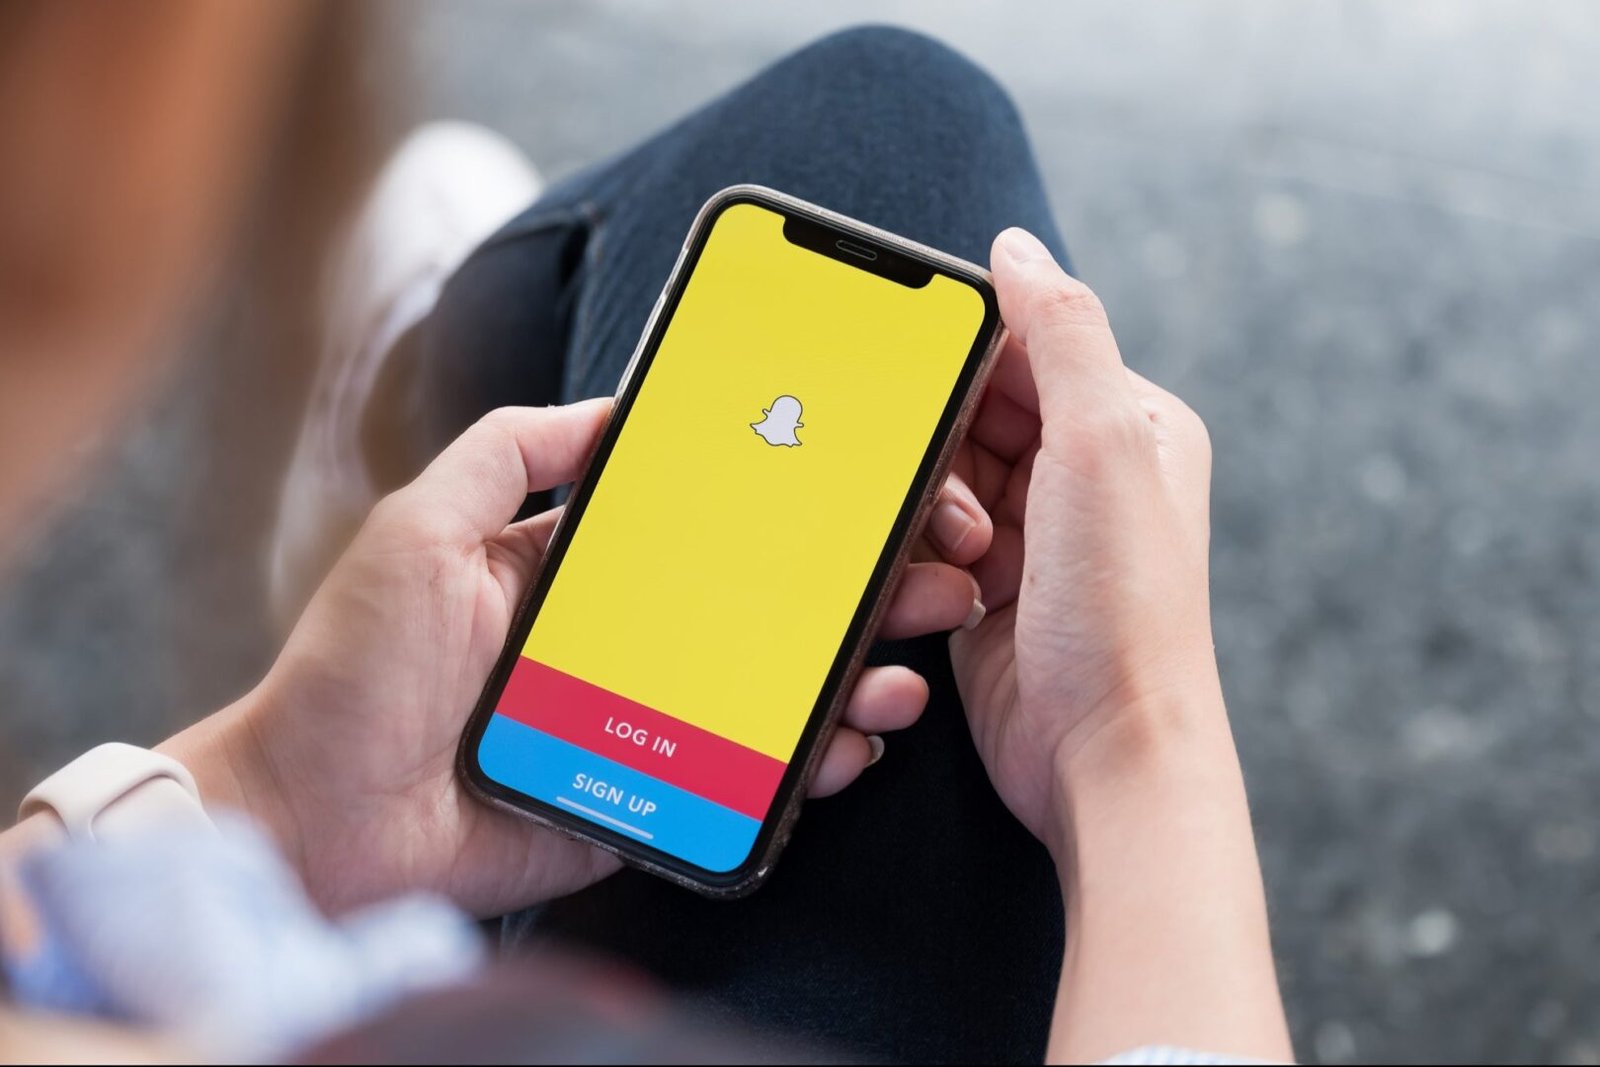 Snapchat Under Investigation by Federal Authorities for Alleged Social Media Drug Deals